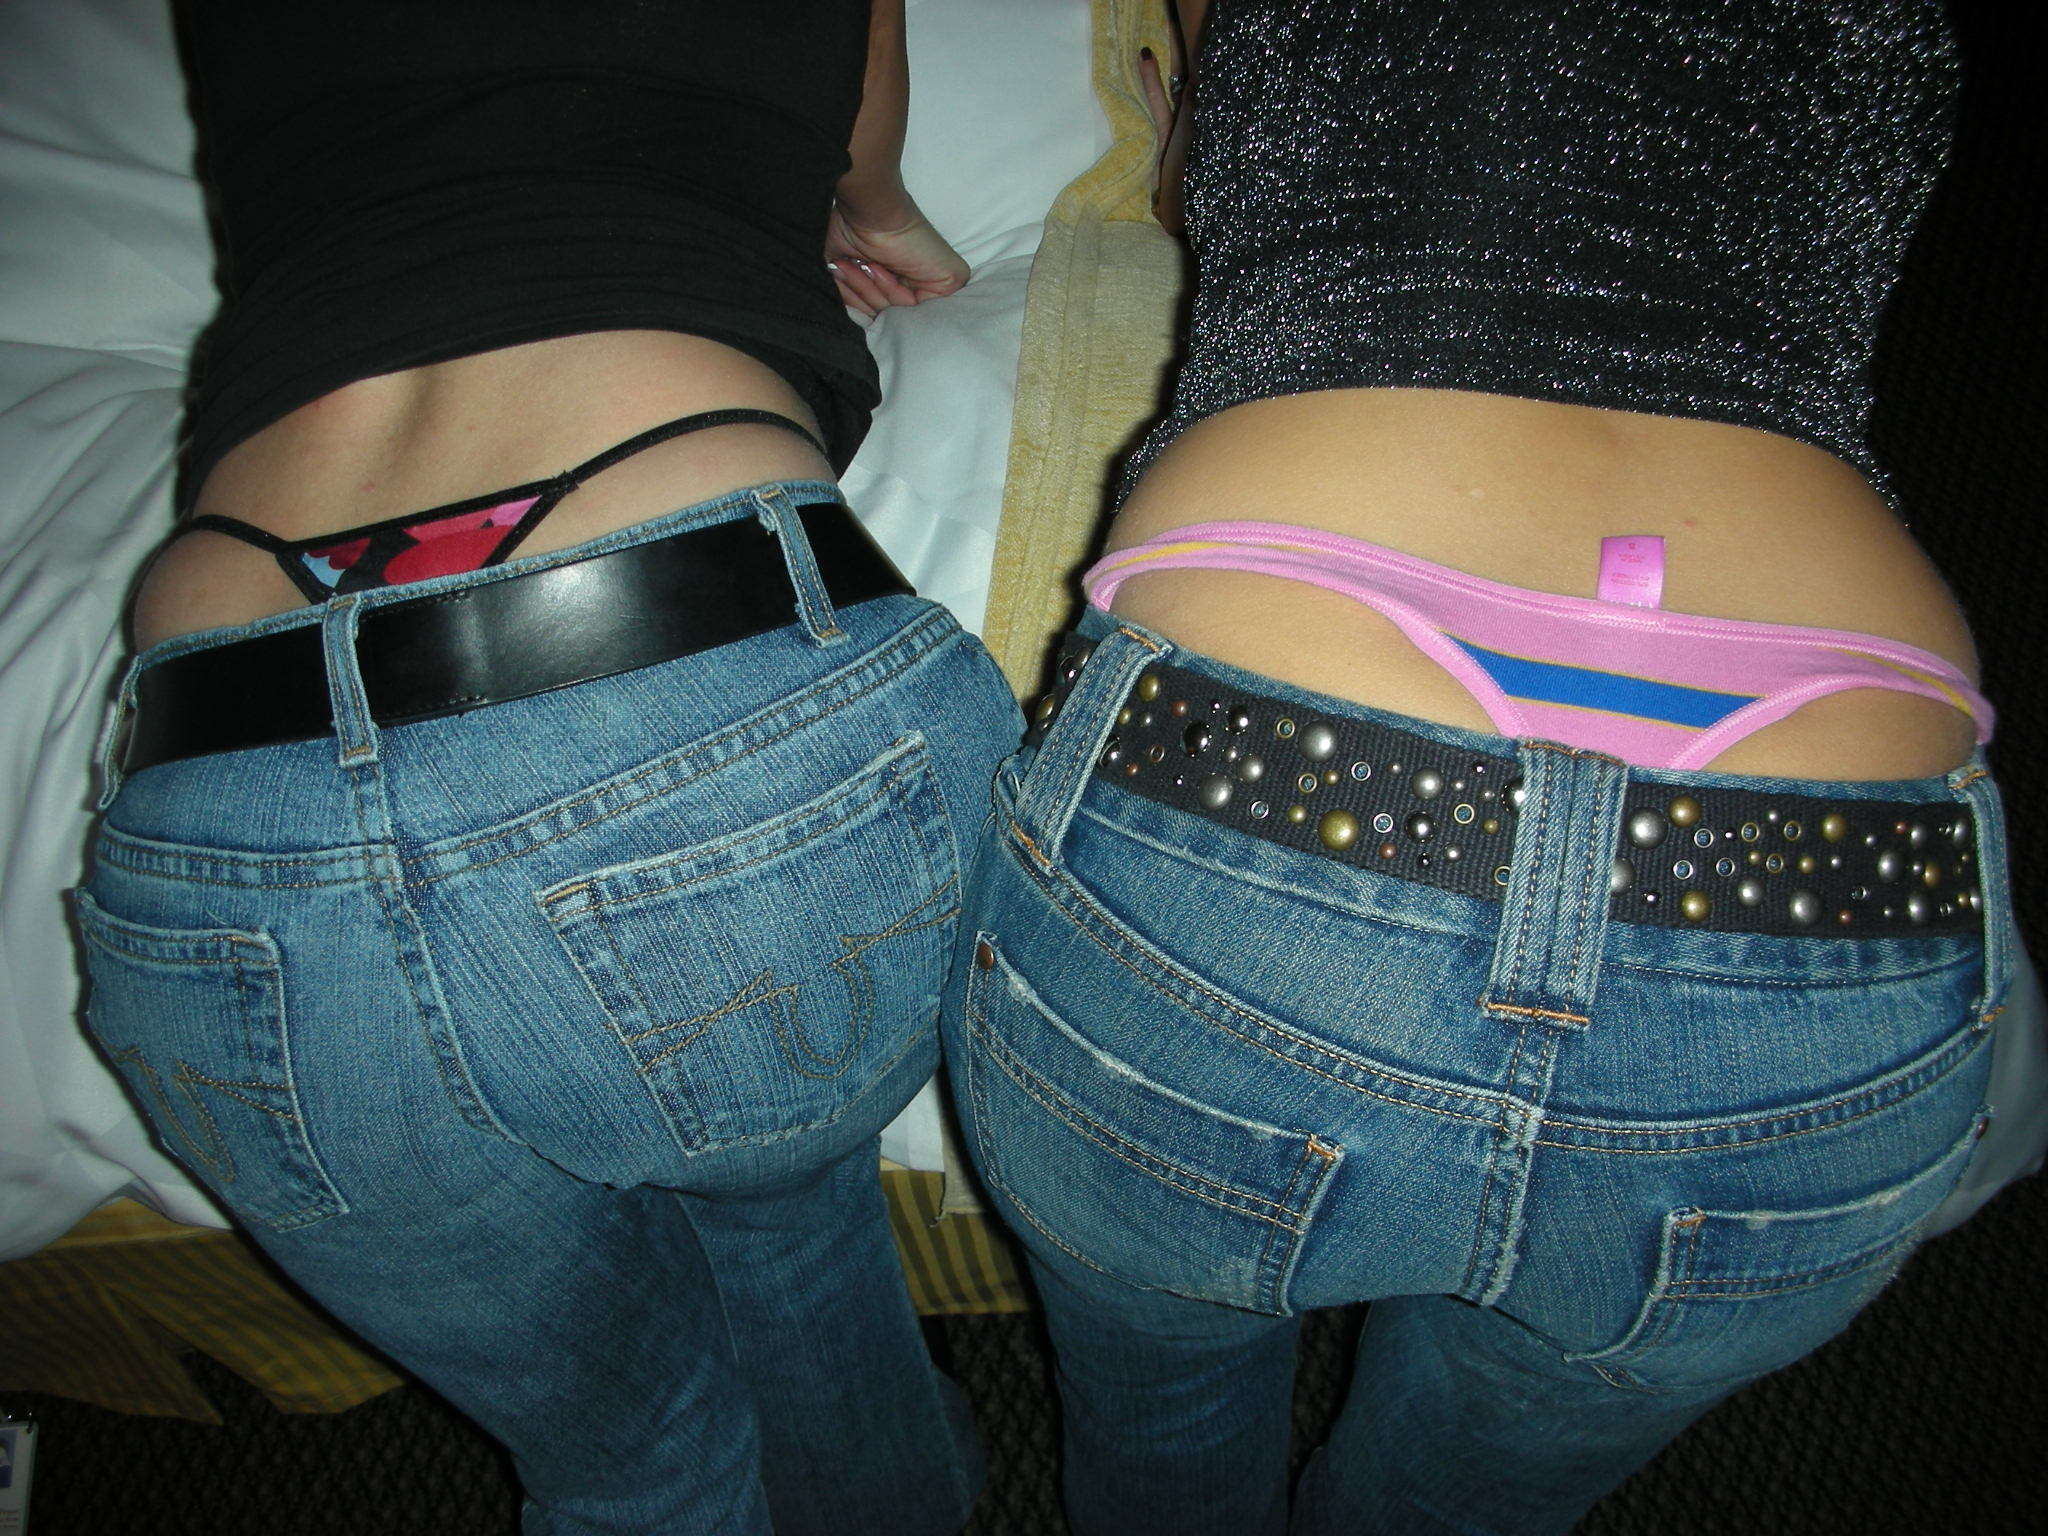 Thong Butts In Jeans - Picture  Ebaums World-8139